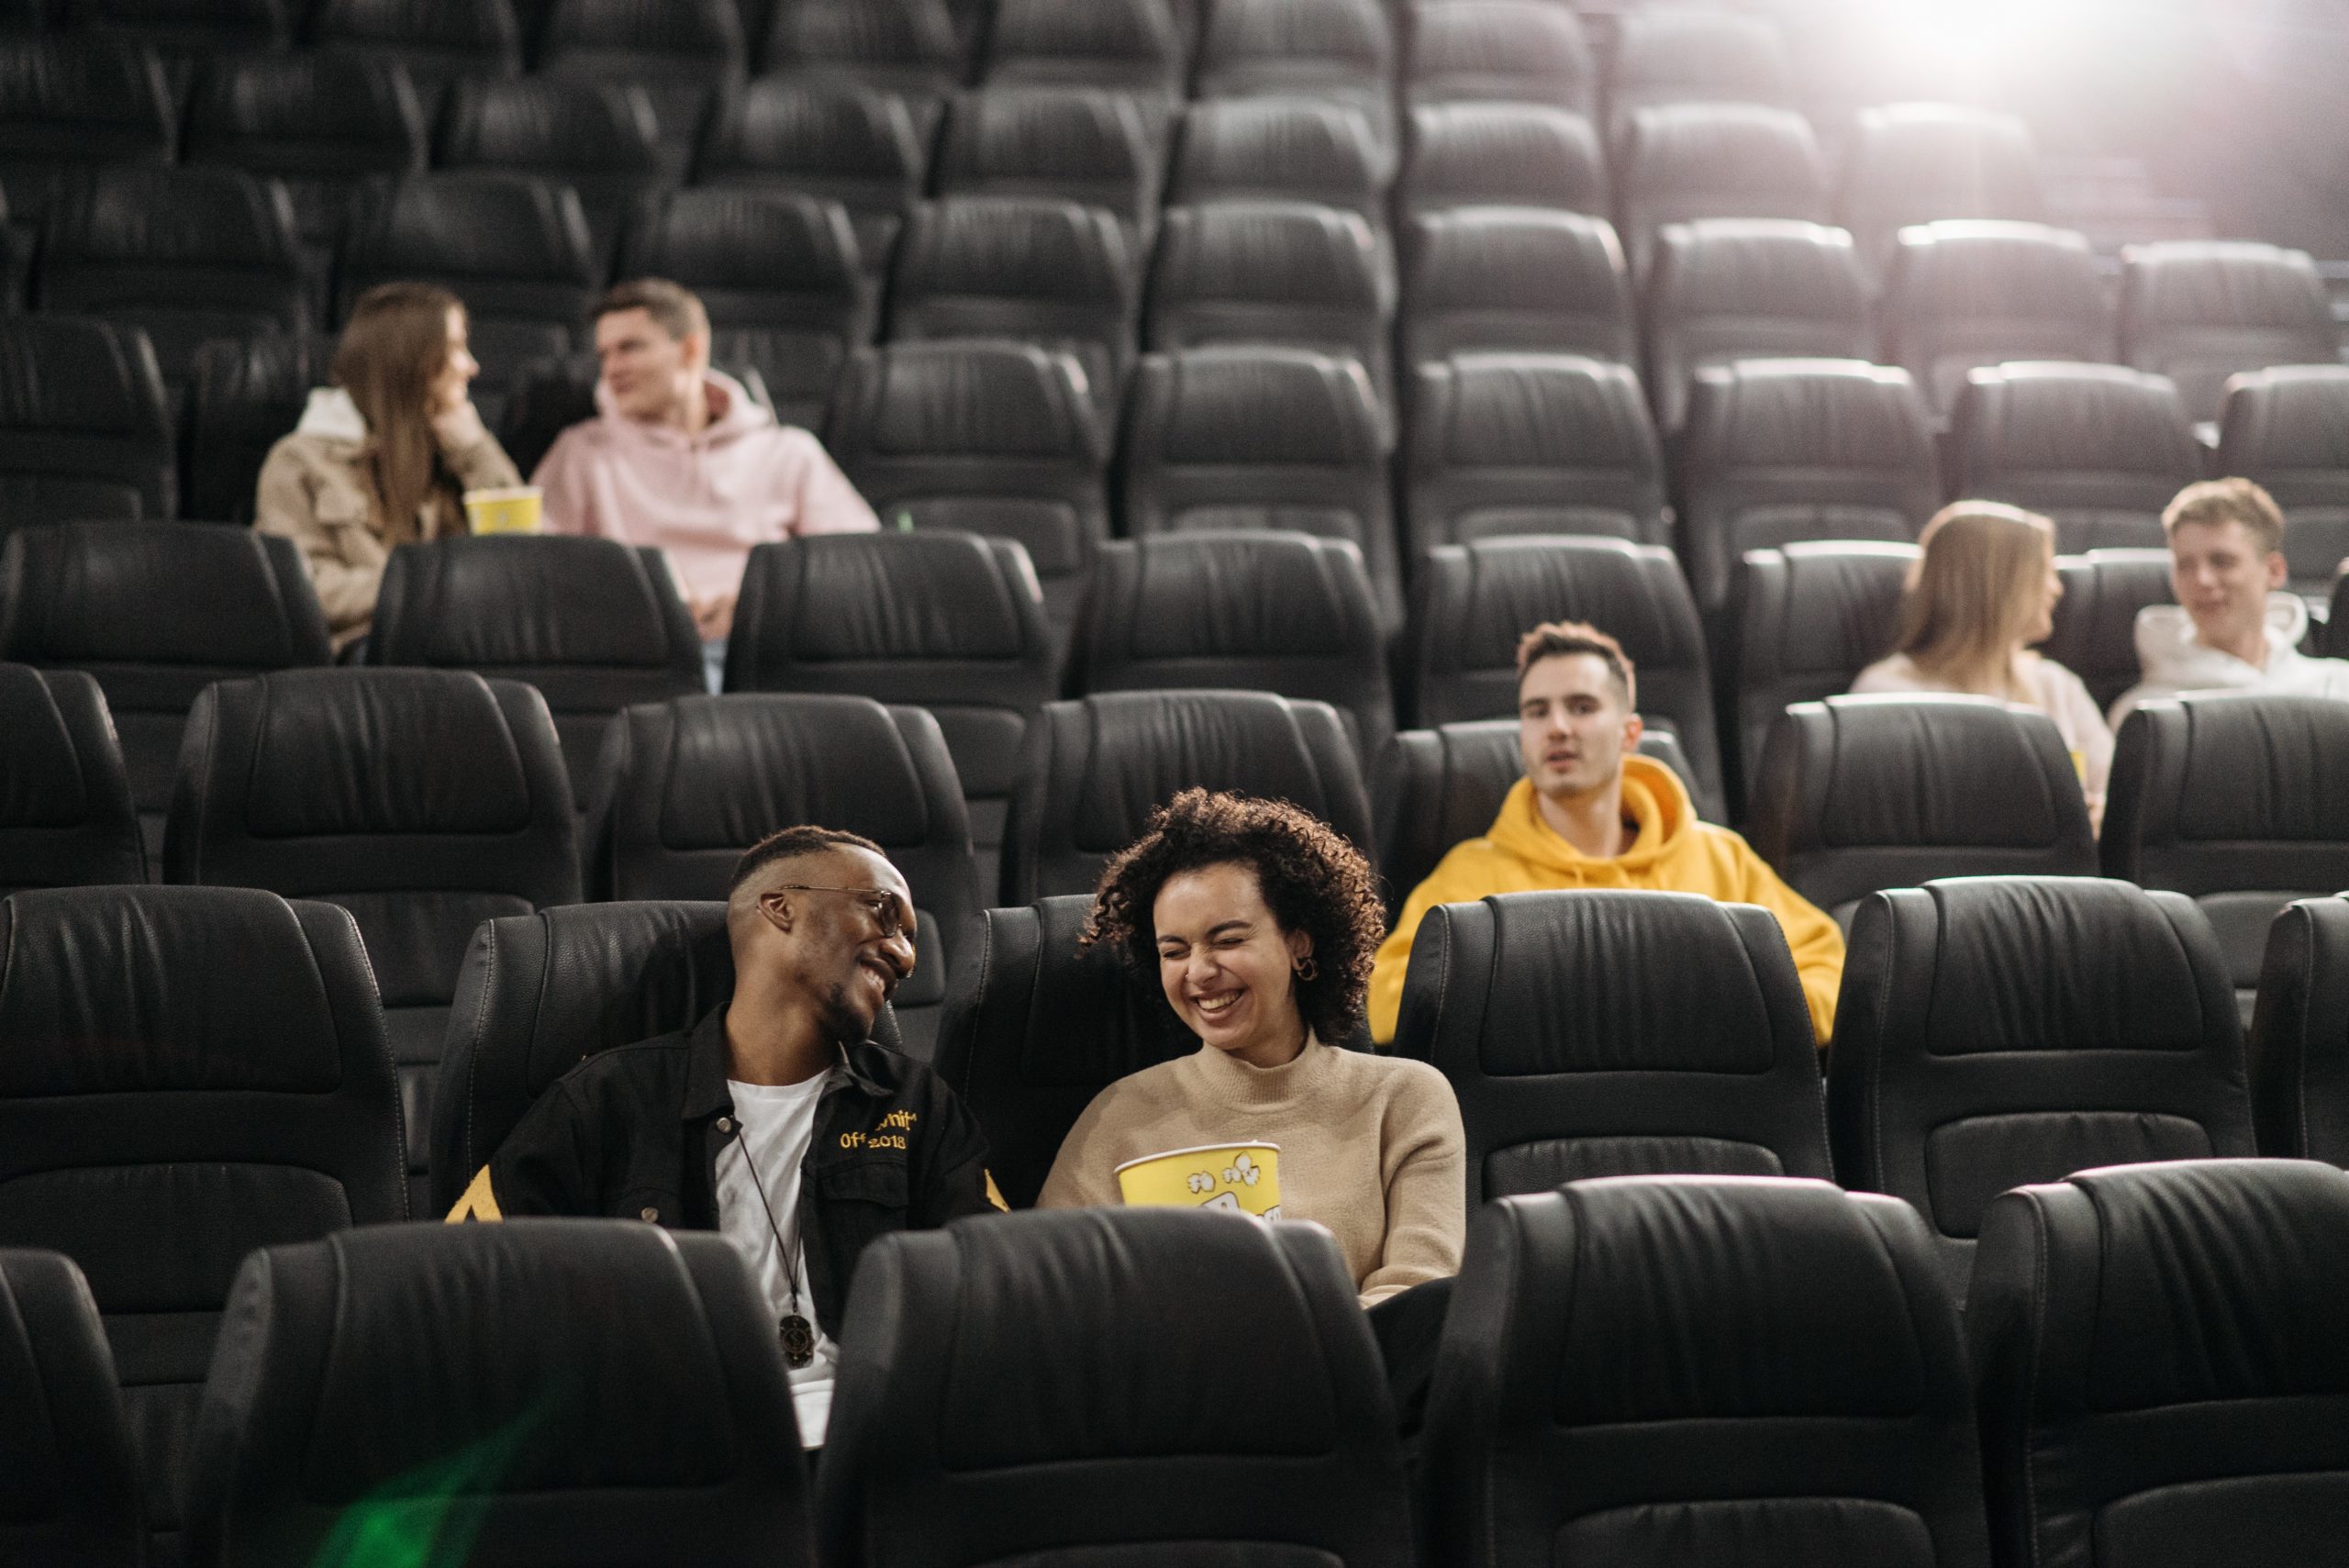 People talking and laughing in a movie theater